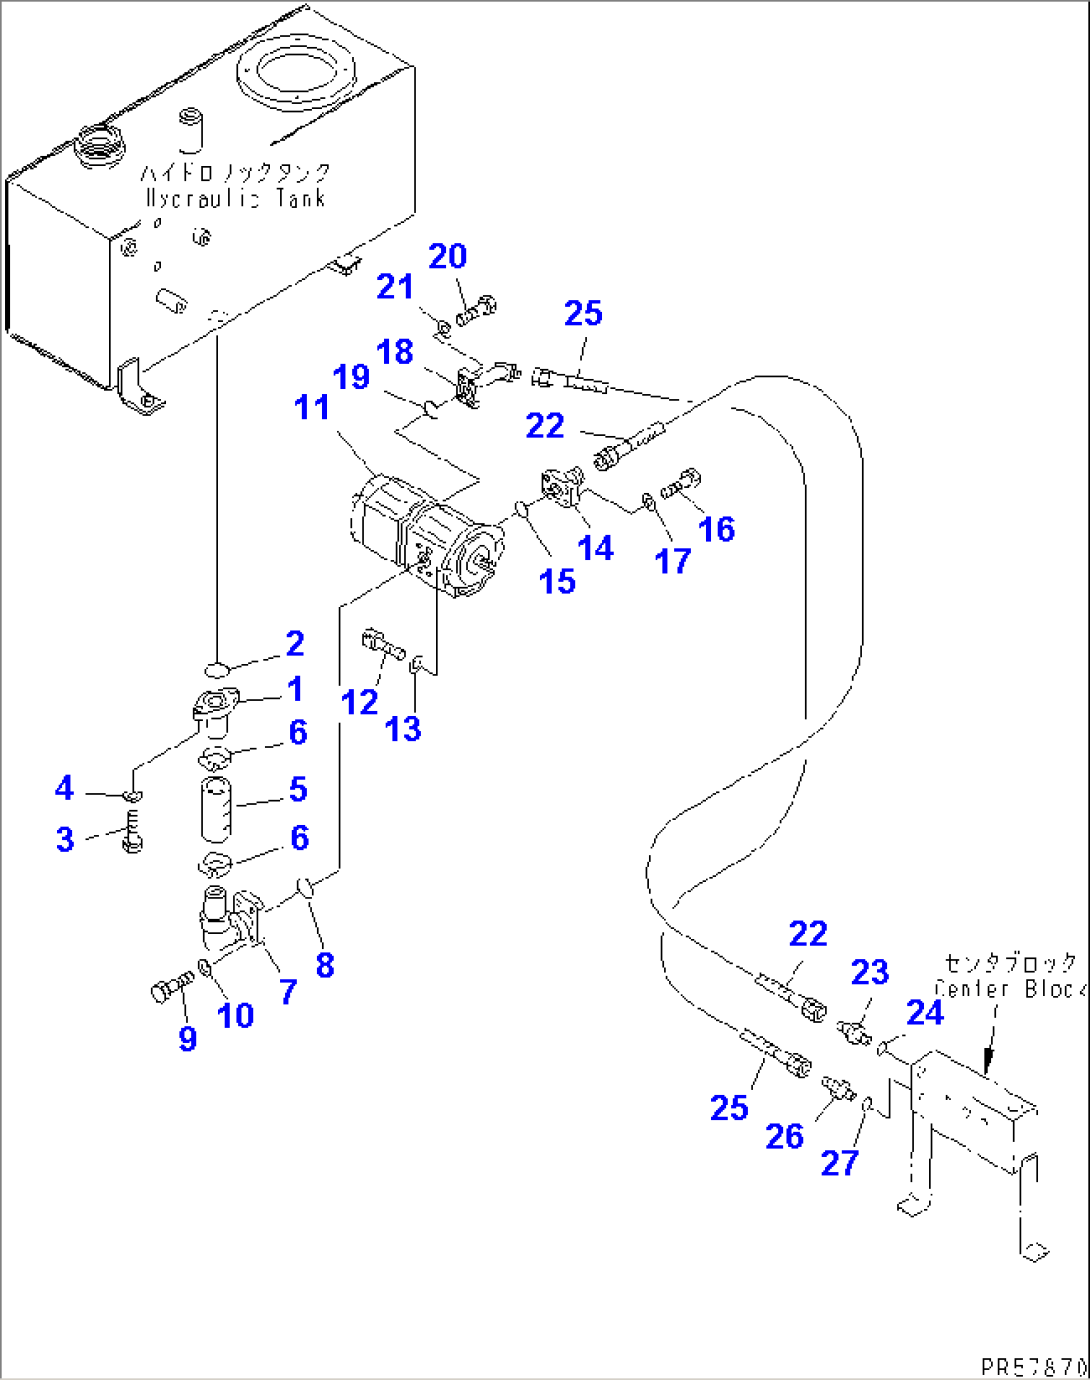 HYDRAULIC PIPING (TANK TO CONTROL VALVE) (1/2)(#1101-)